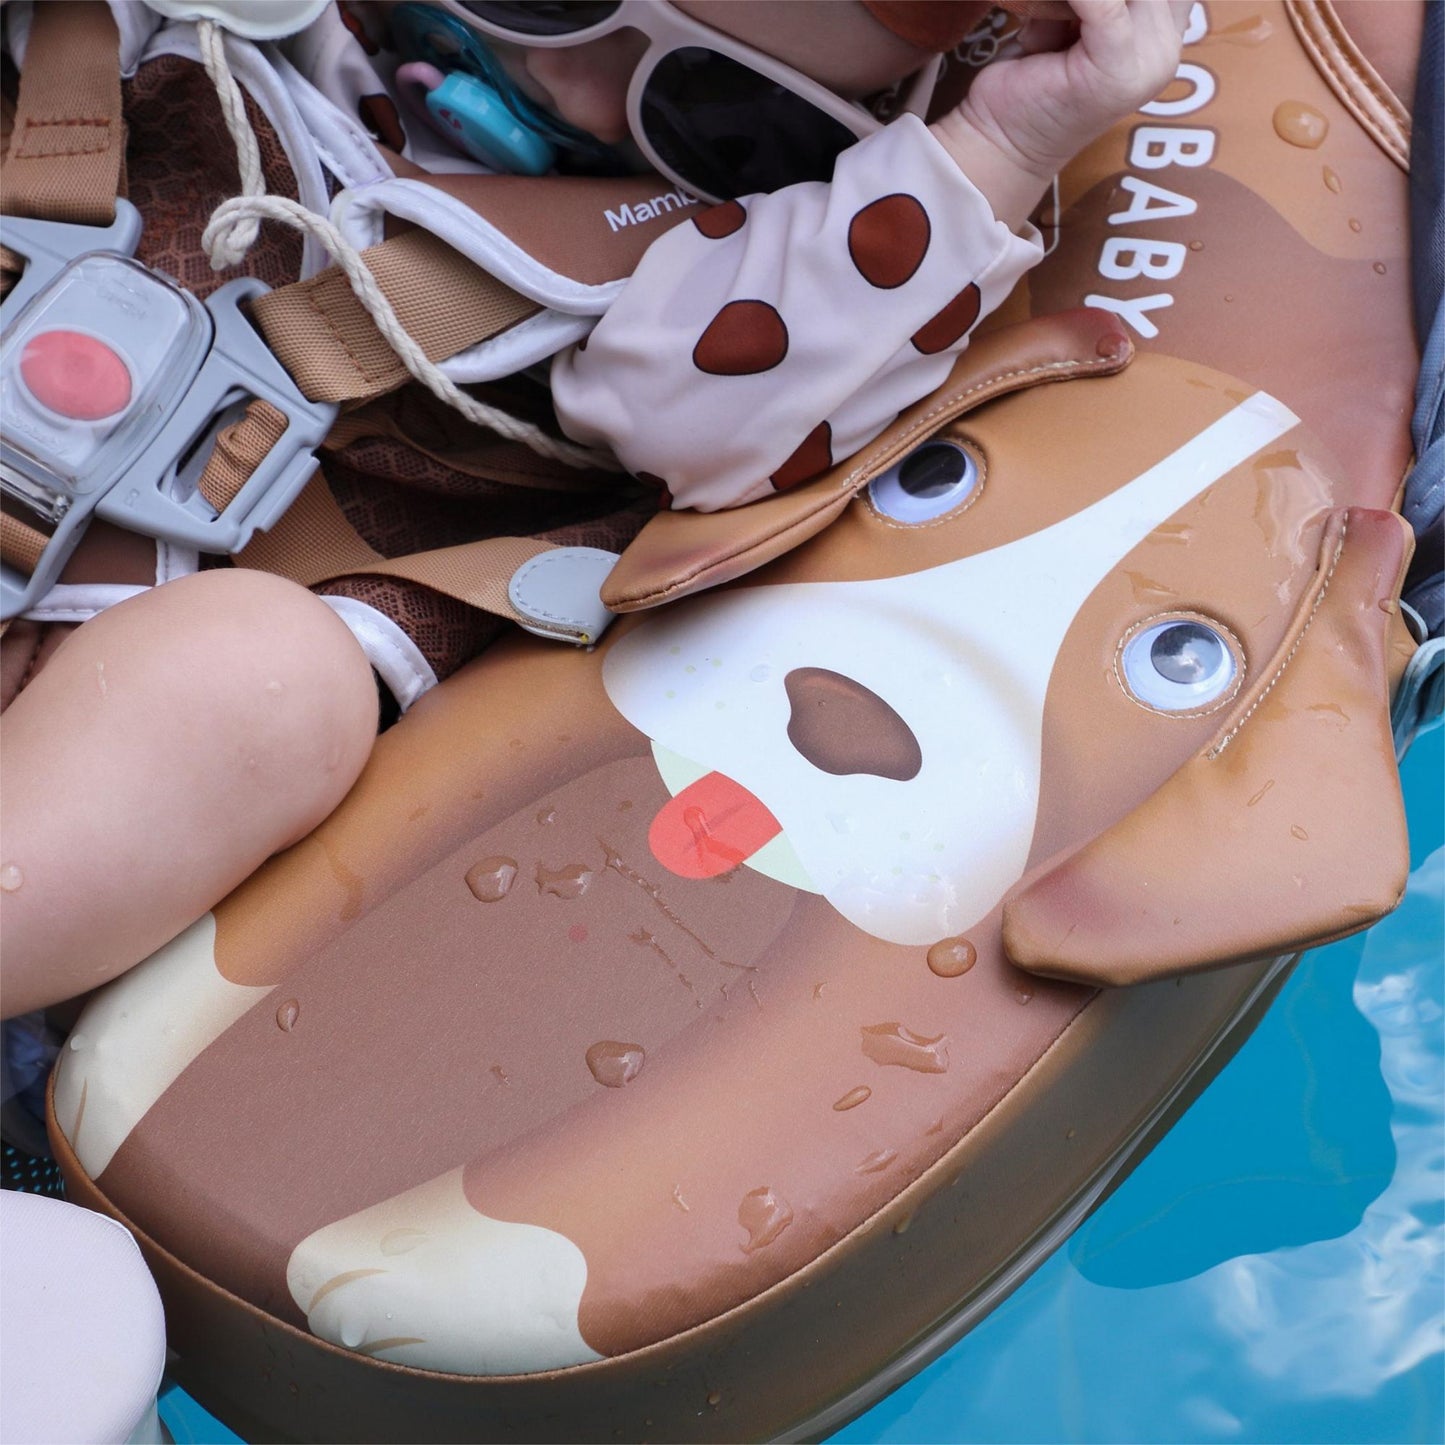 Mambobaby Swim Float with Canopy Puppy